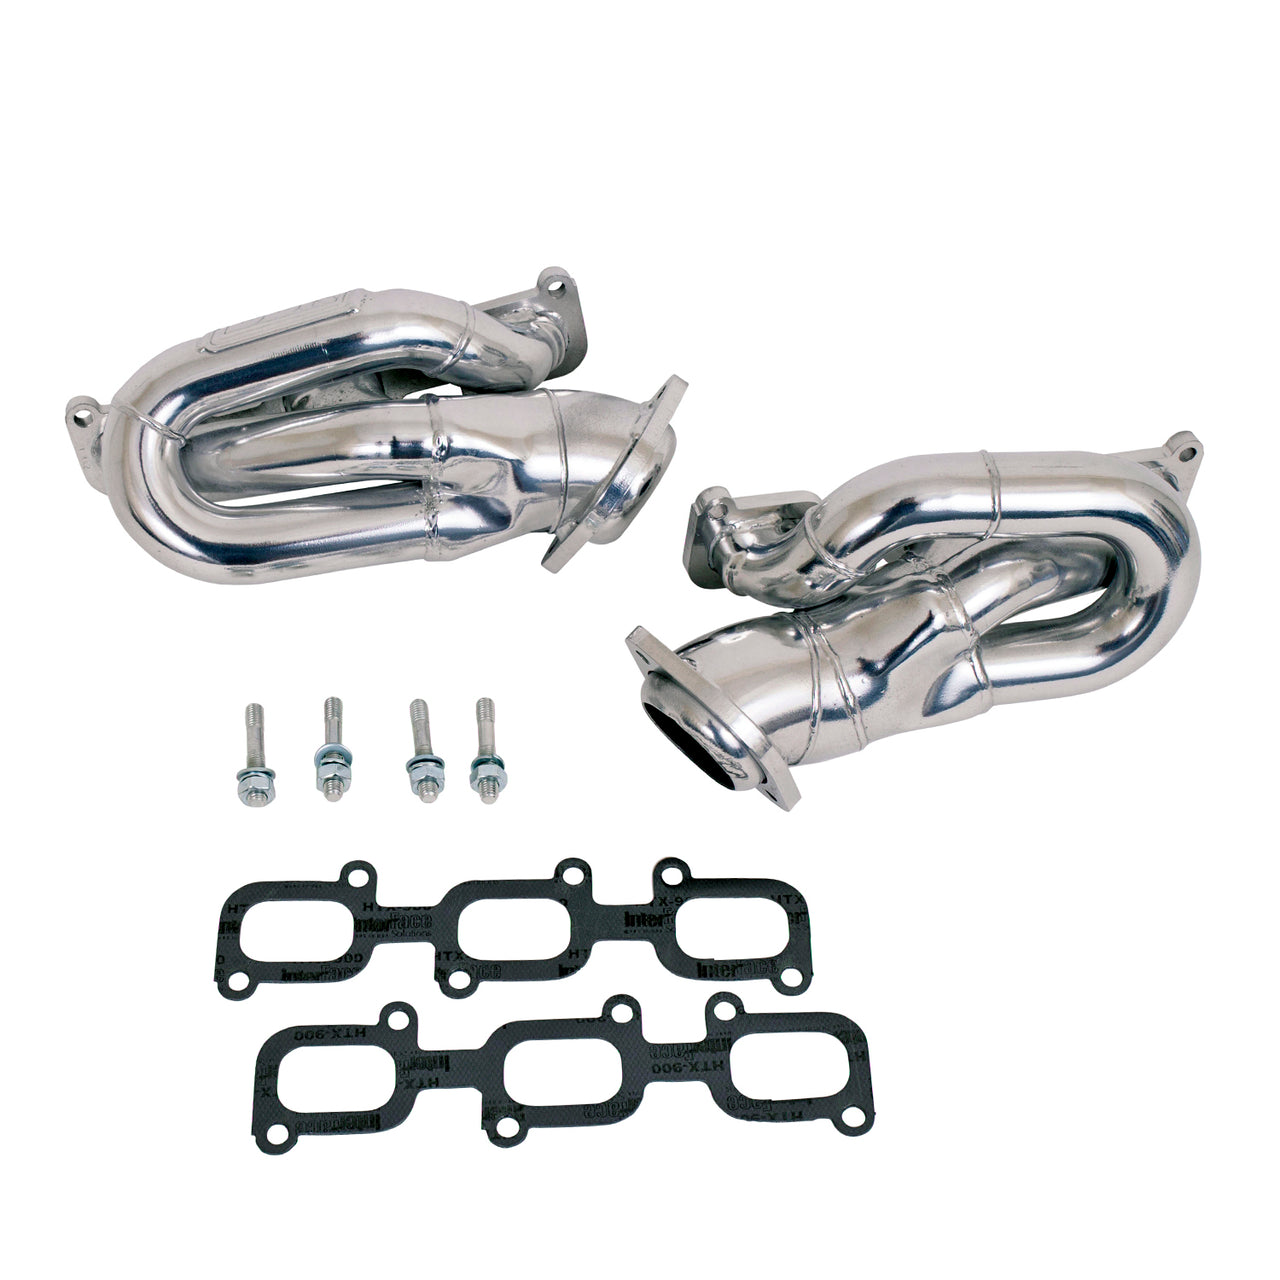 2011-2017 MUSTANG 3.7L V6 1-5/8 SHORTY TUNED LENGTH HEADERS (POLISHED SILVER CERAMIC)